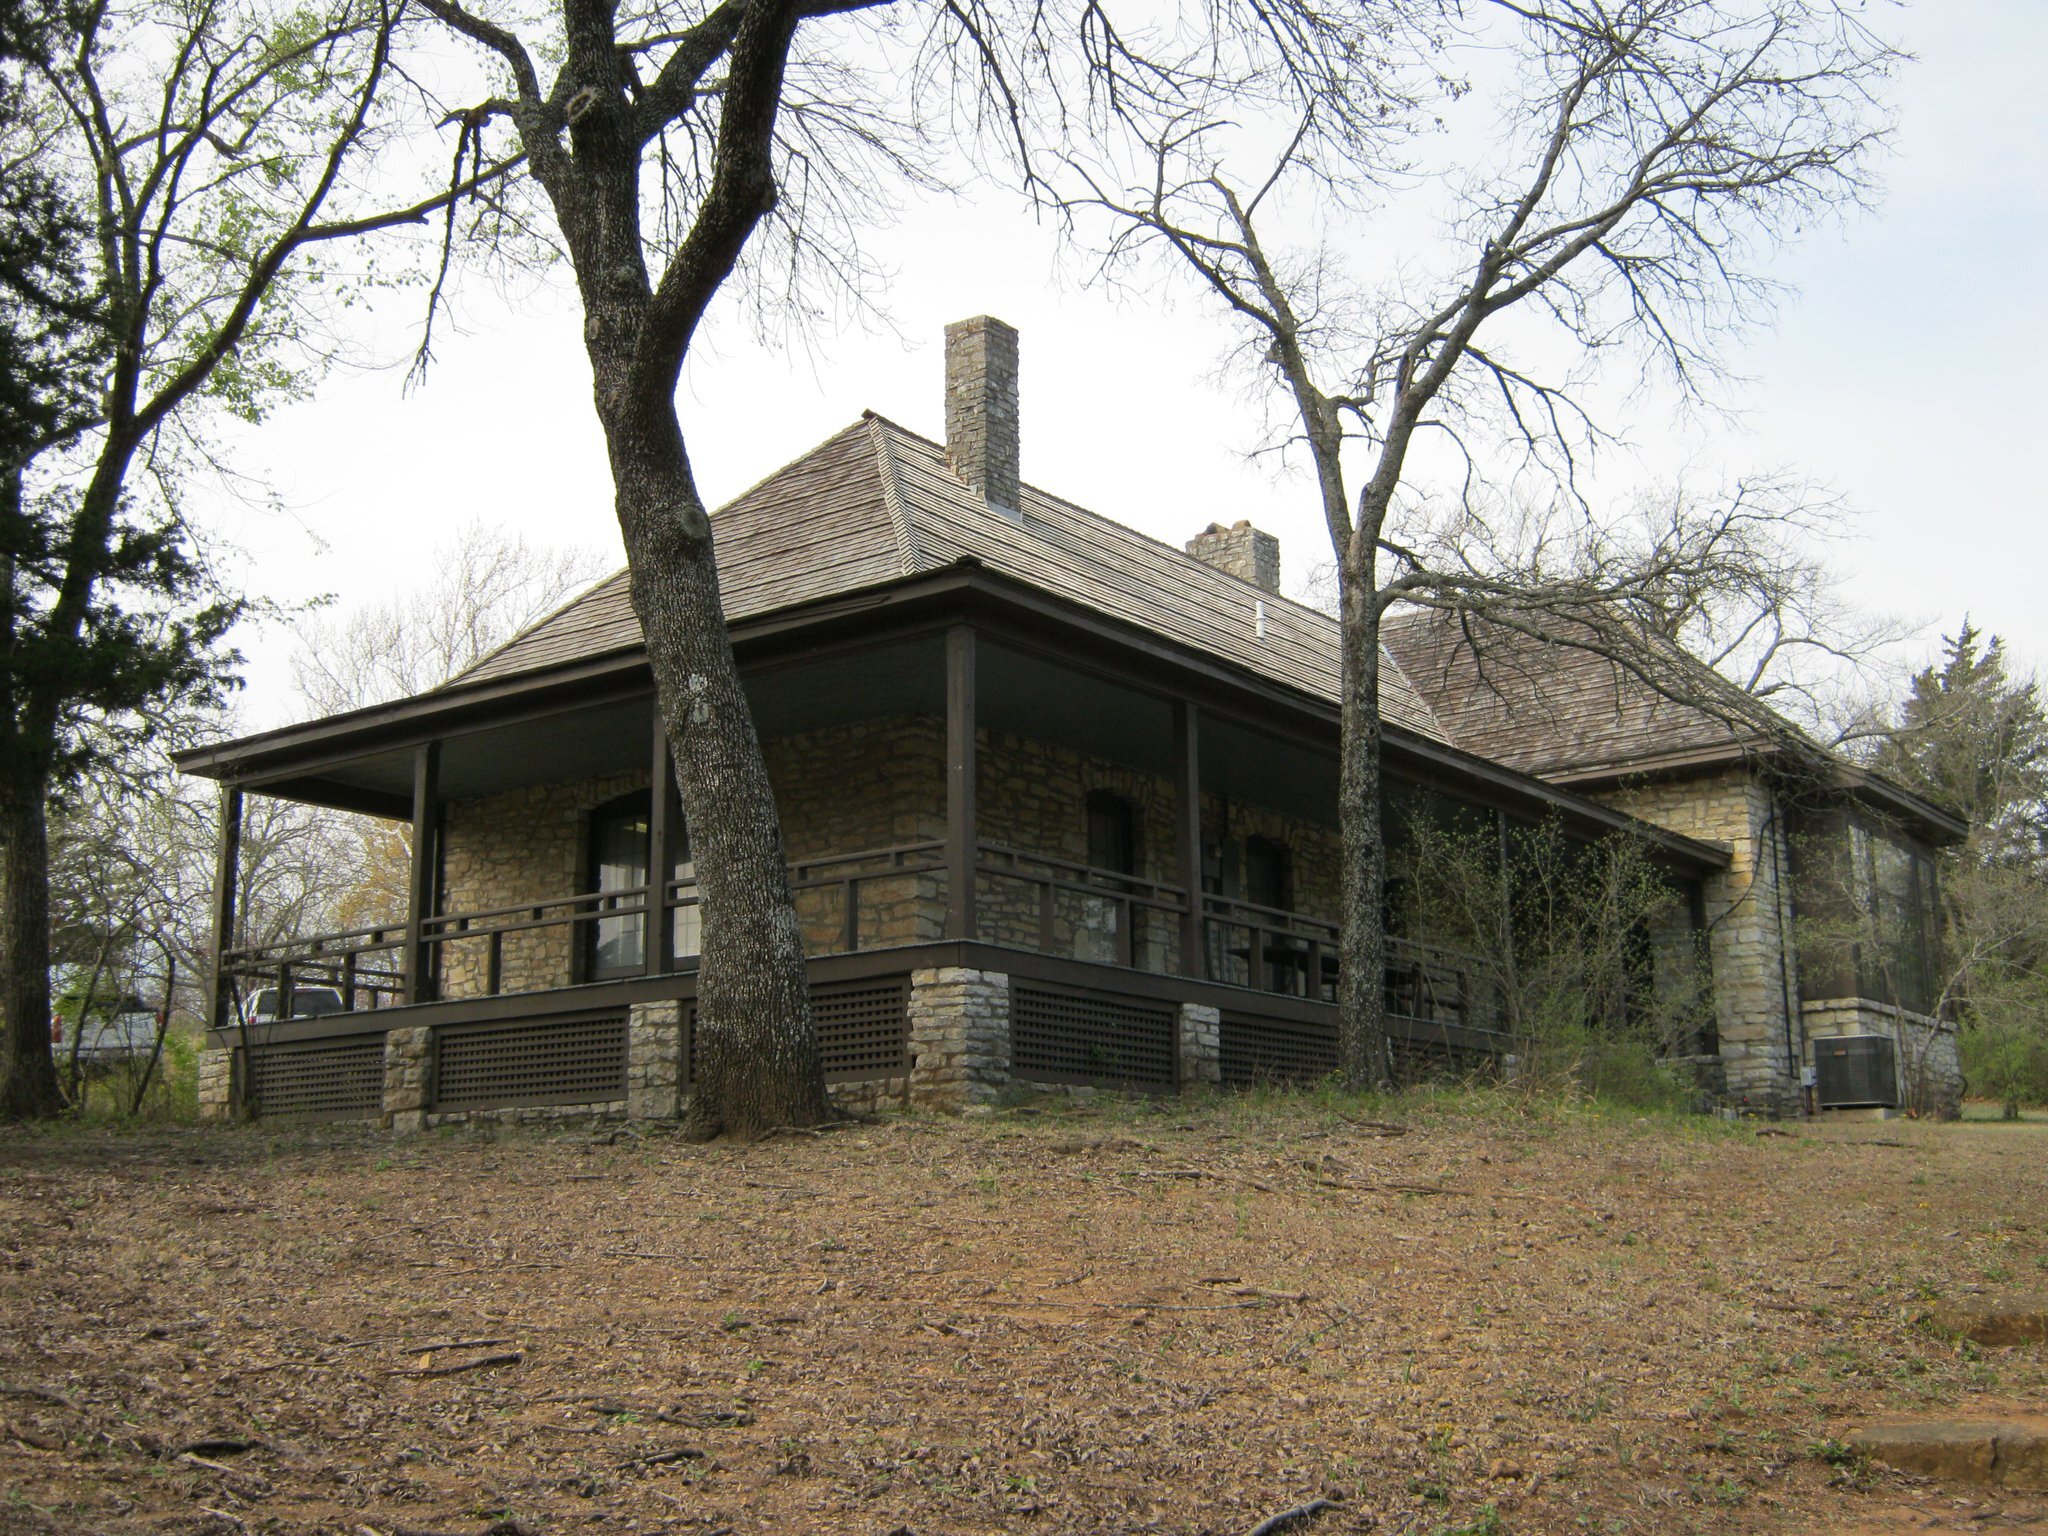 Maintenance building at Platt Historic District; stone structure with a wraparound porch.